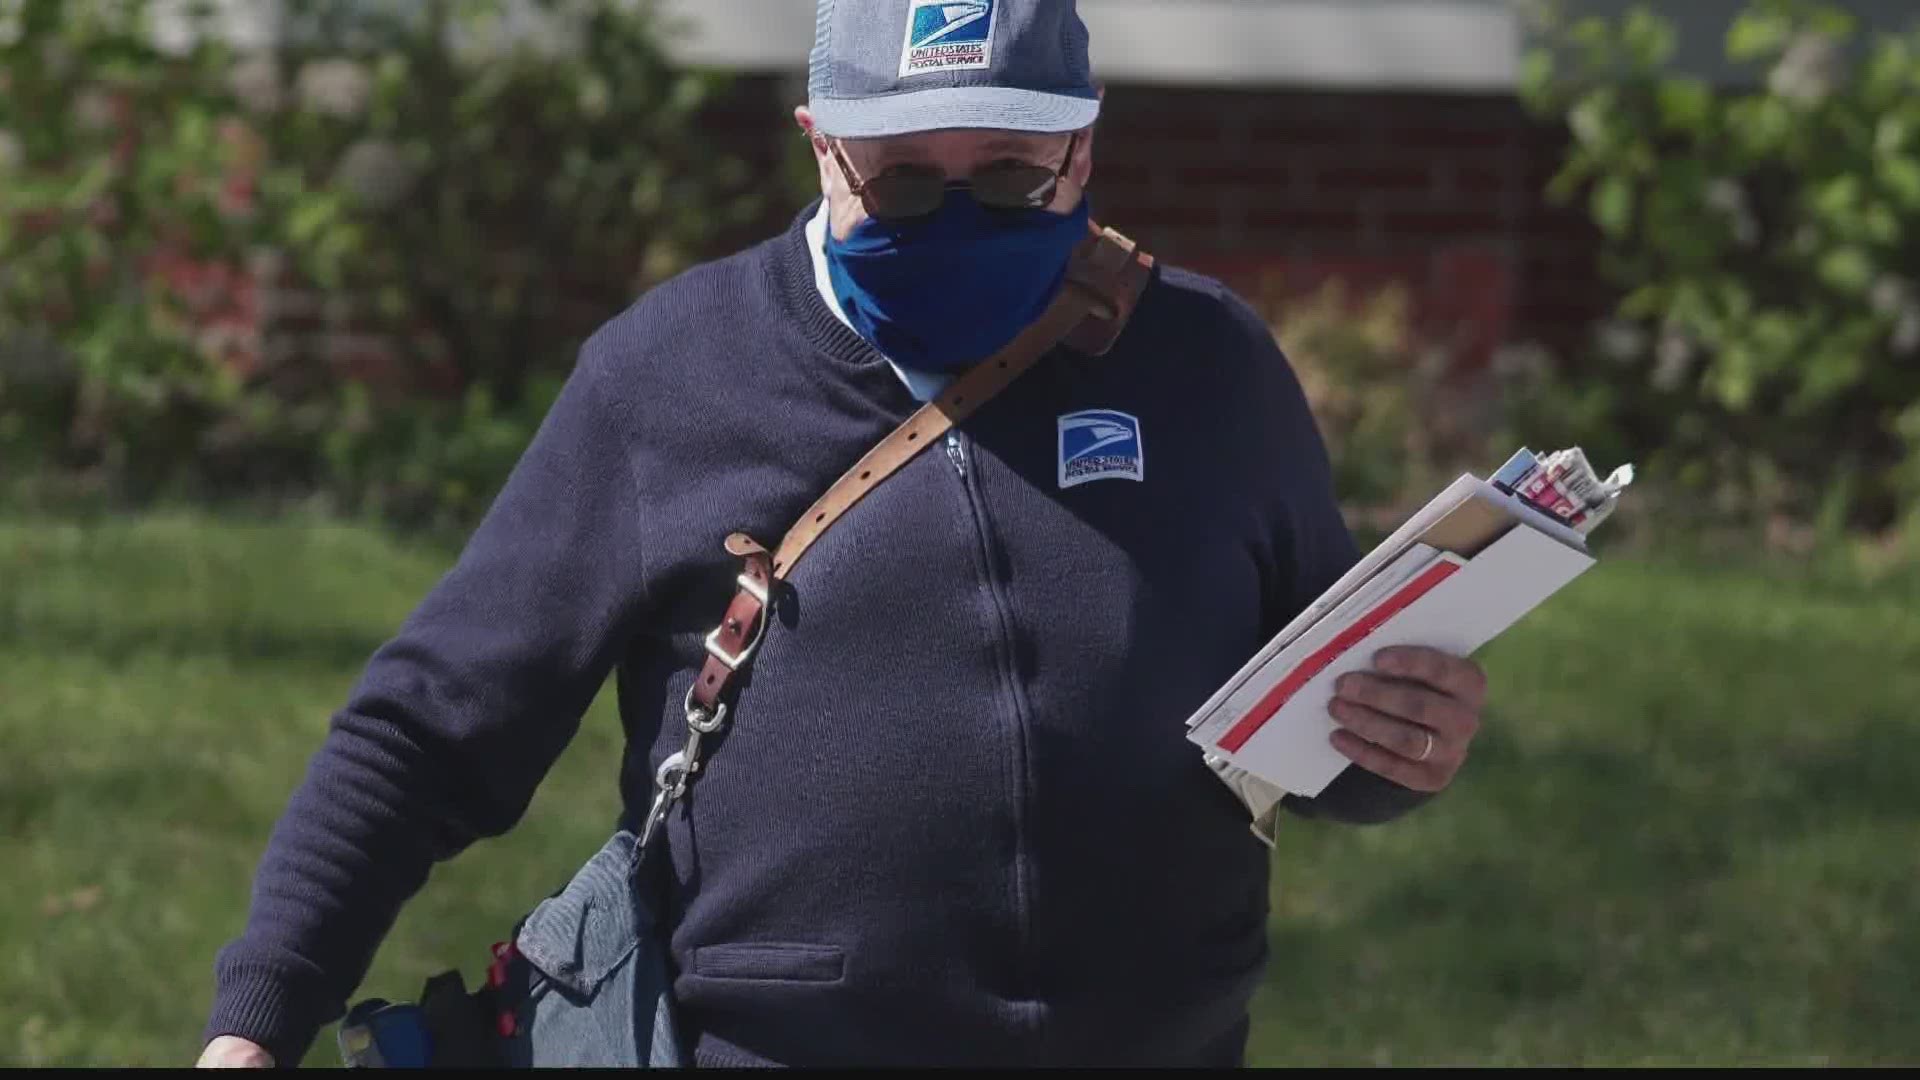 USPS faces some major financial challenges amid COVID-19 pandemic.